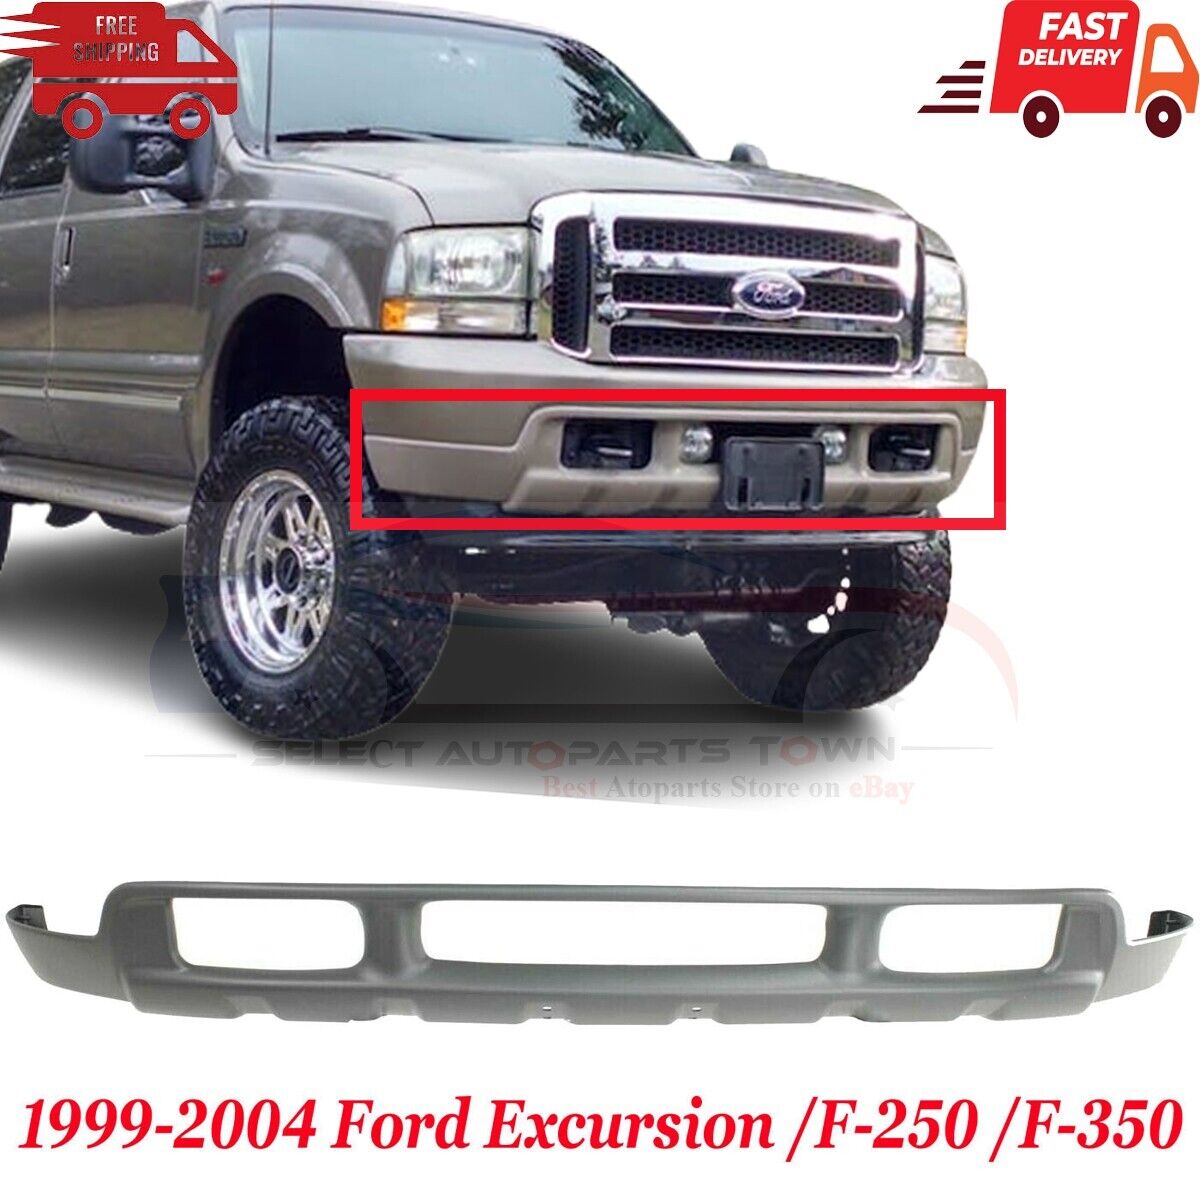 New Fits 99-04 Ford F-250 /F-350 Super Duty, Upper Front Valance Panel, Textured